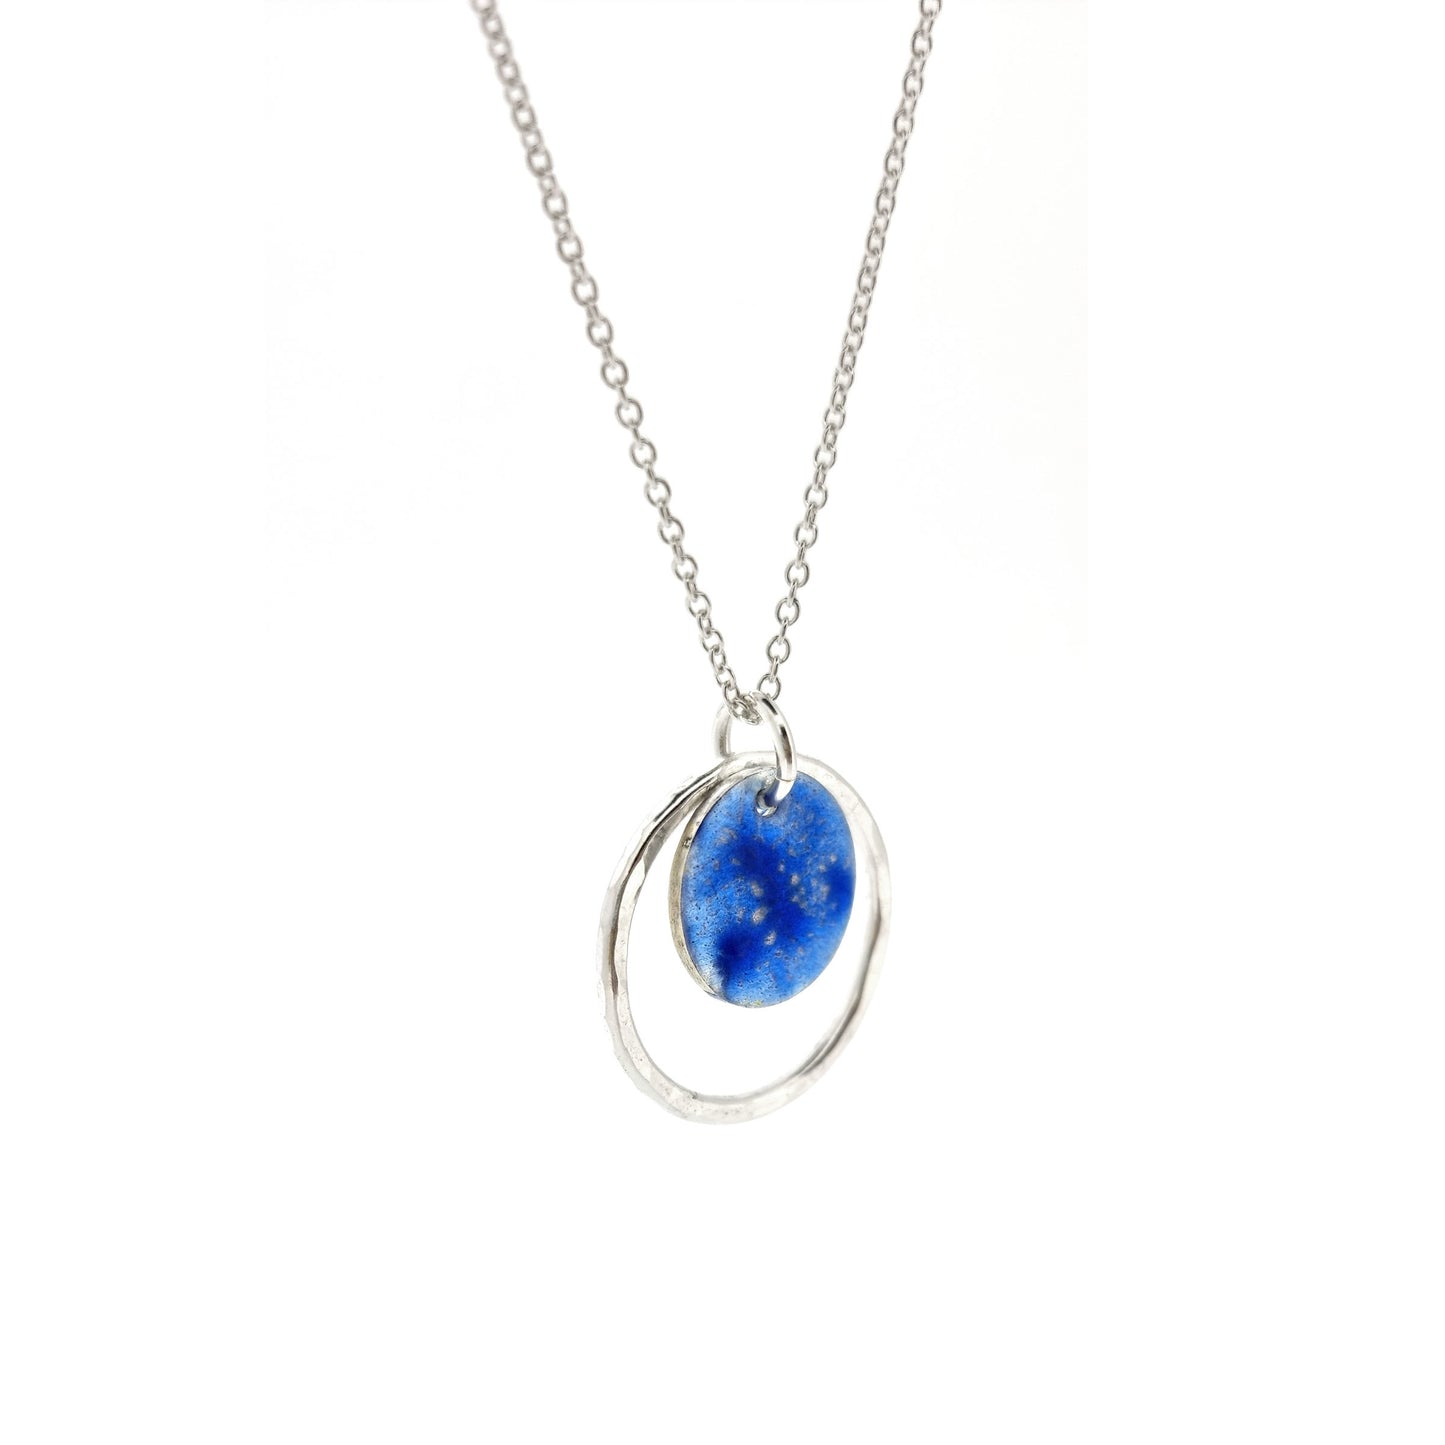 A silver pendant with a central disc with a blue patterned enamel surrounded by a silver hammered open circle. On a silver chain. Side view.